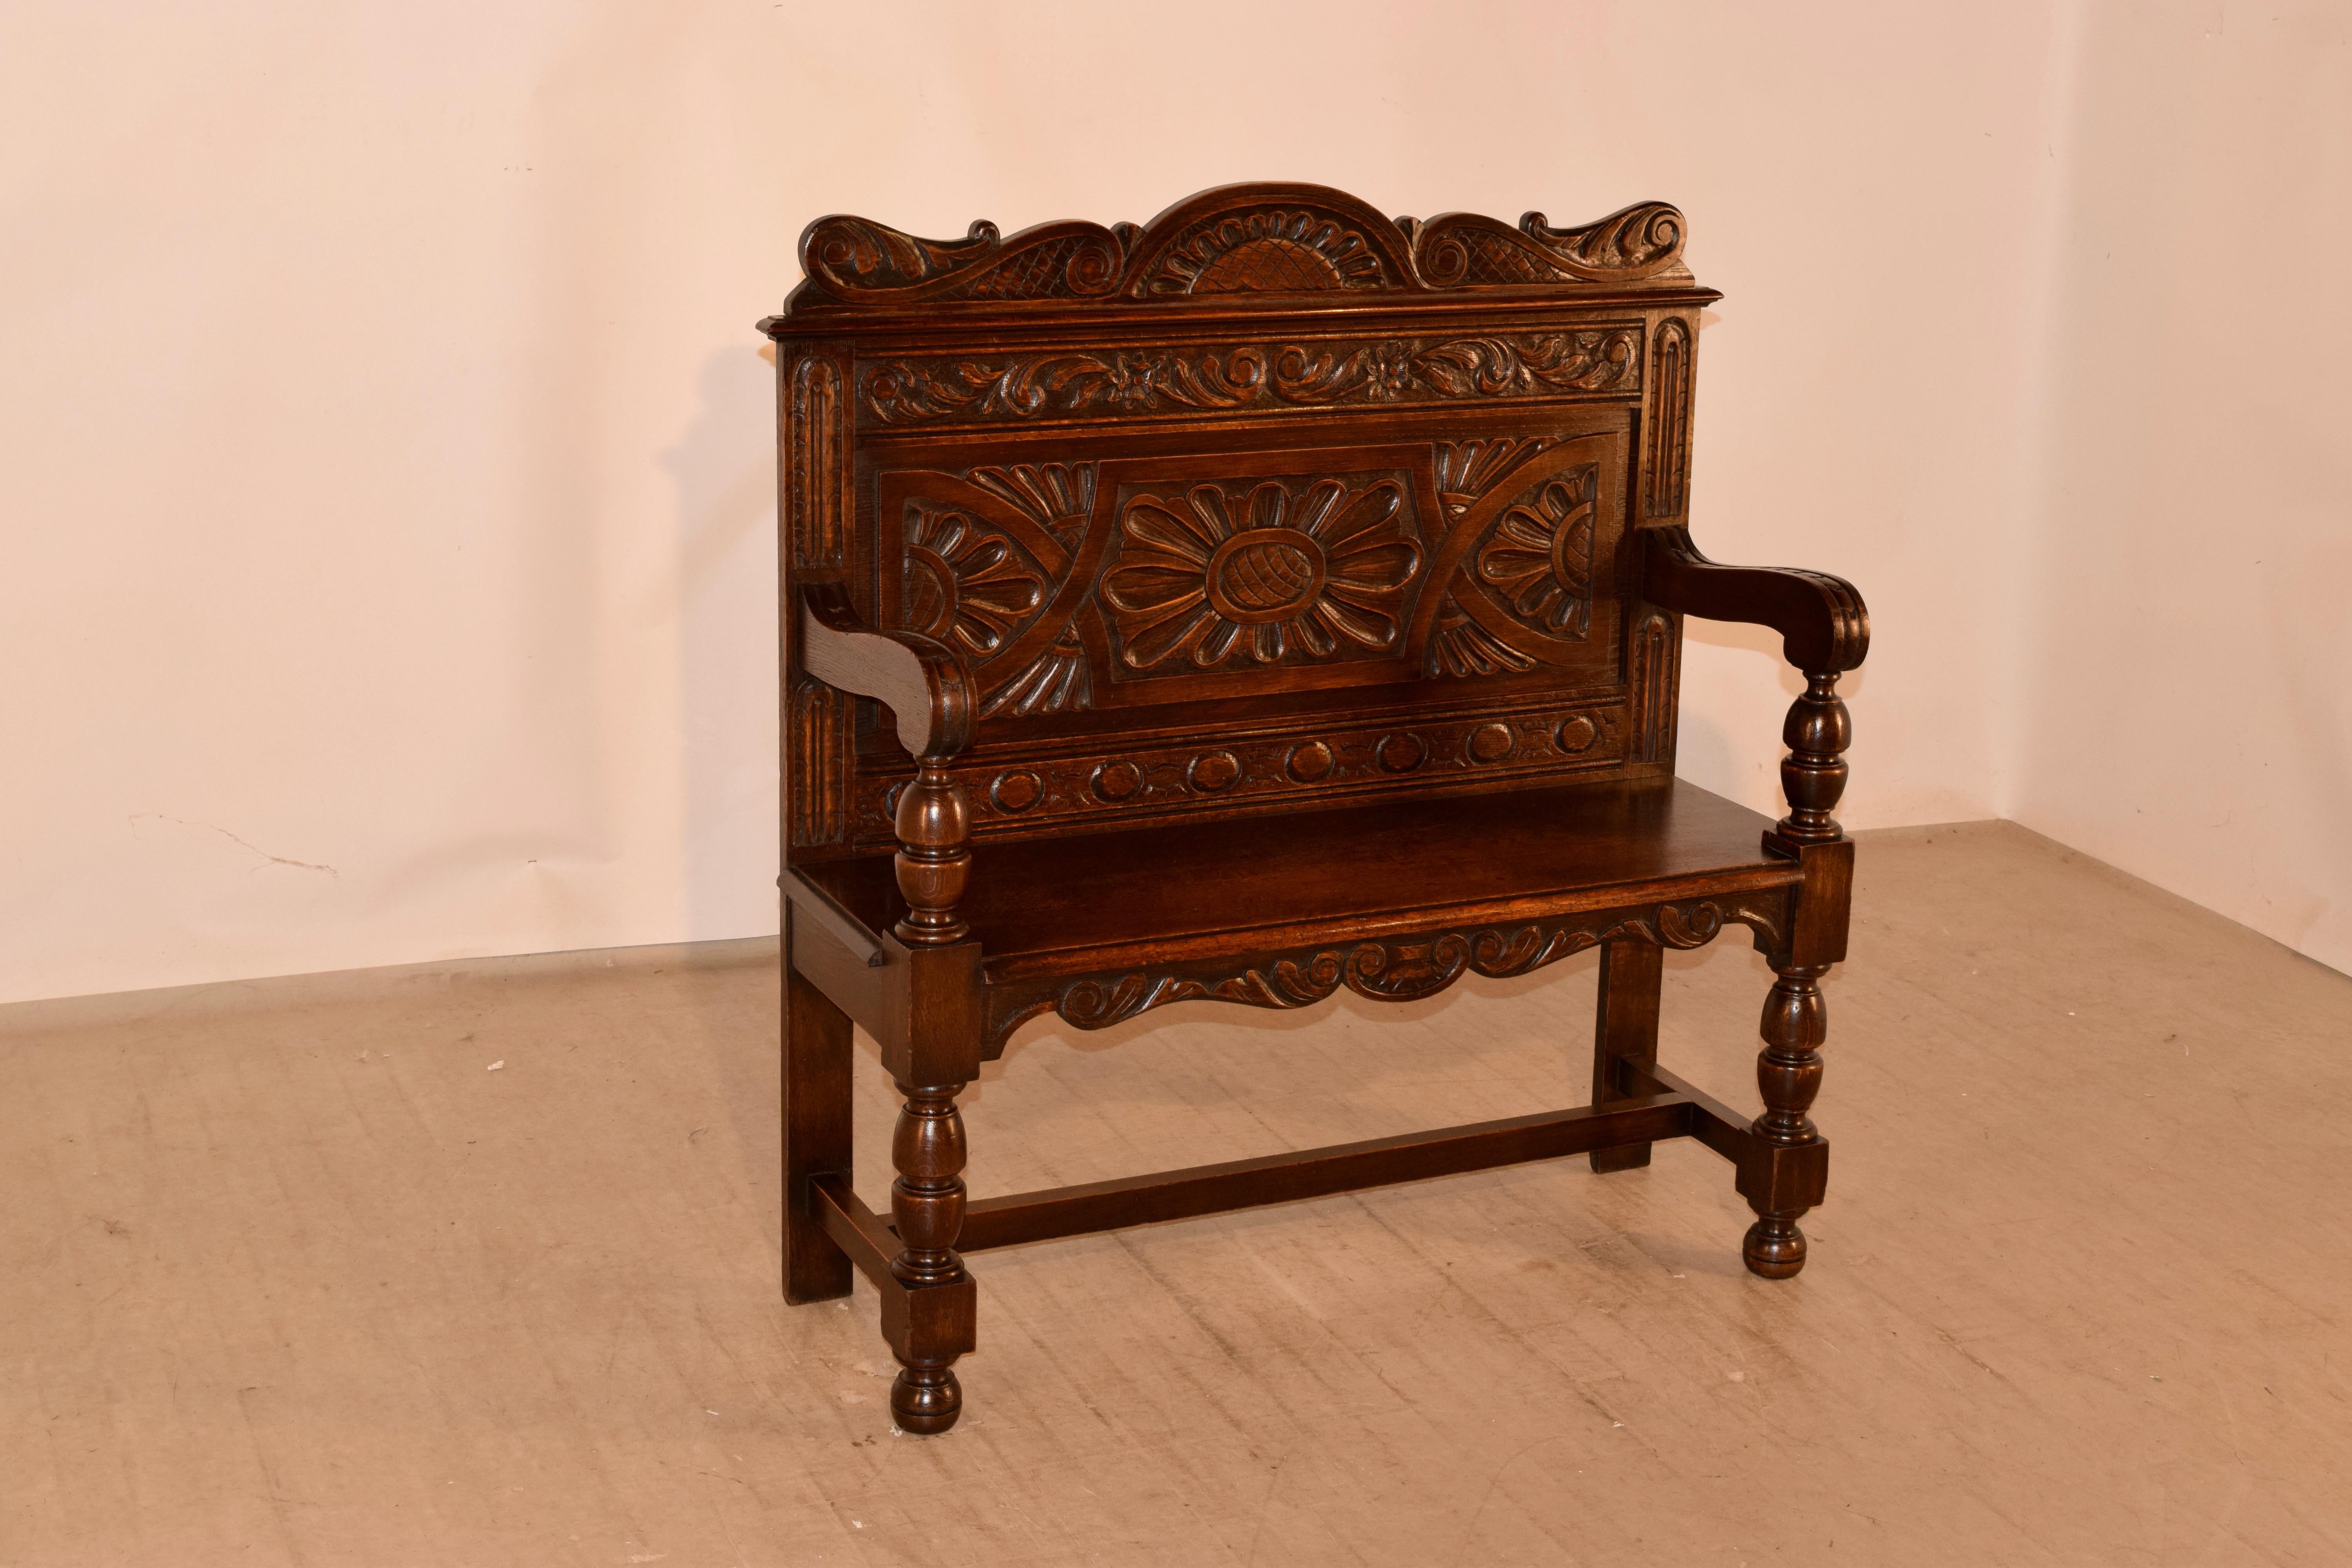 19th century oak settle from England. The top has a lovely scalloped and hand carved decorated crown over a wonderfully hand carved decorated paneled back. The arms have scrolled ends over hand turned supports, which continue to the front legs. The